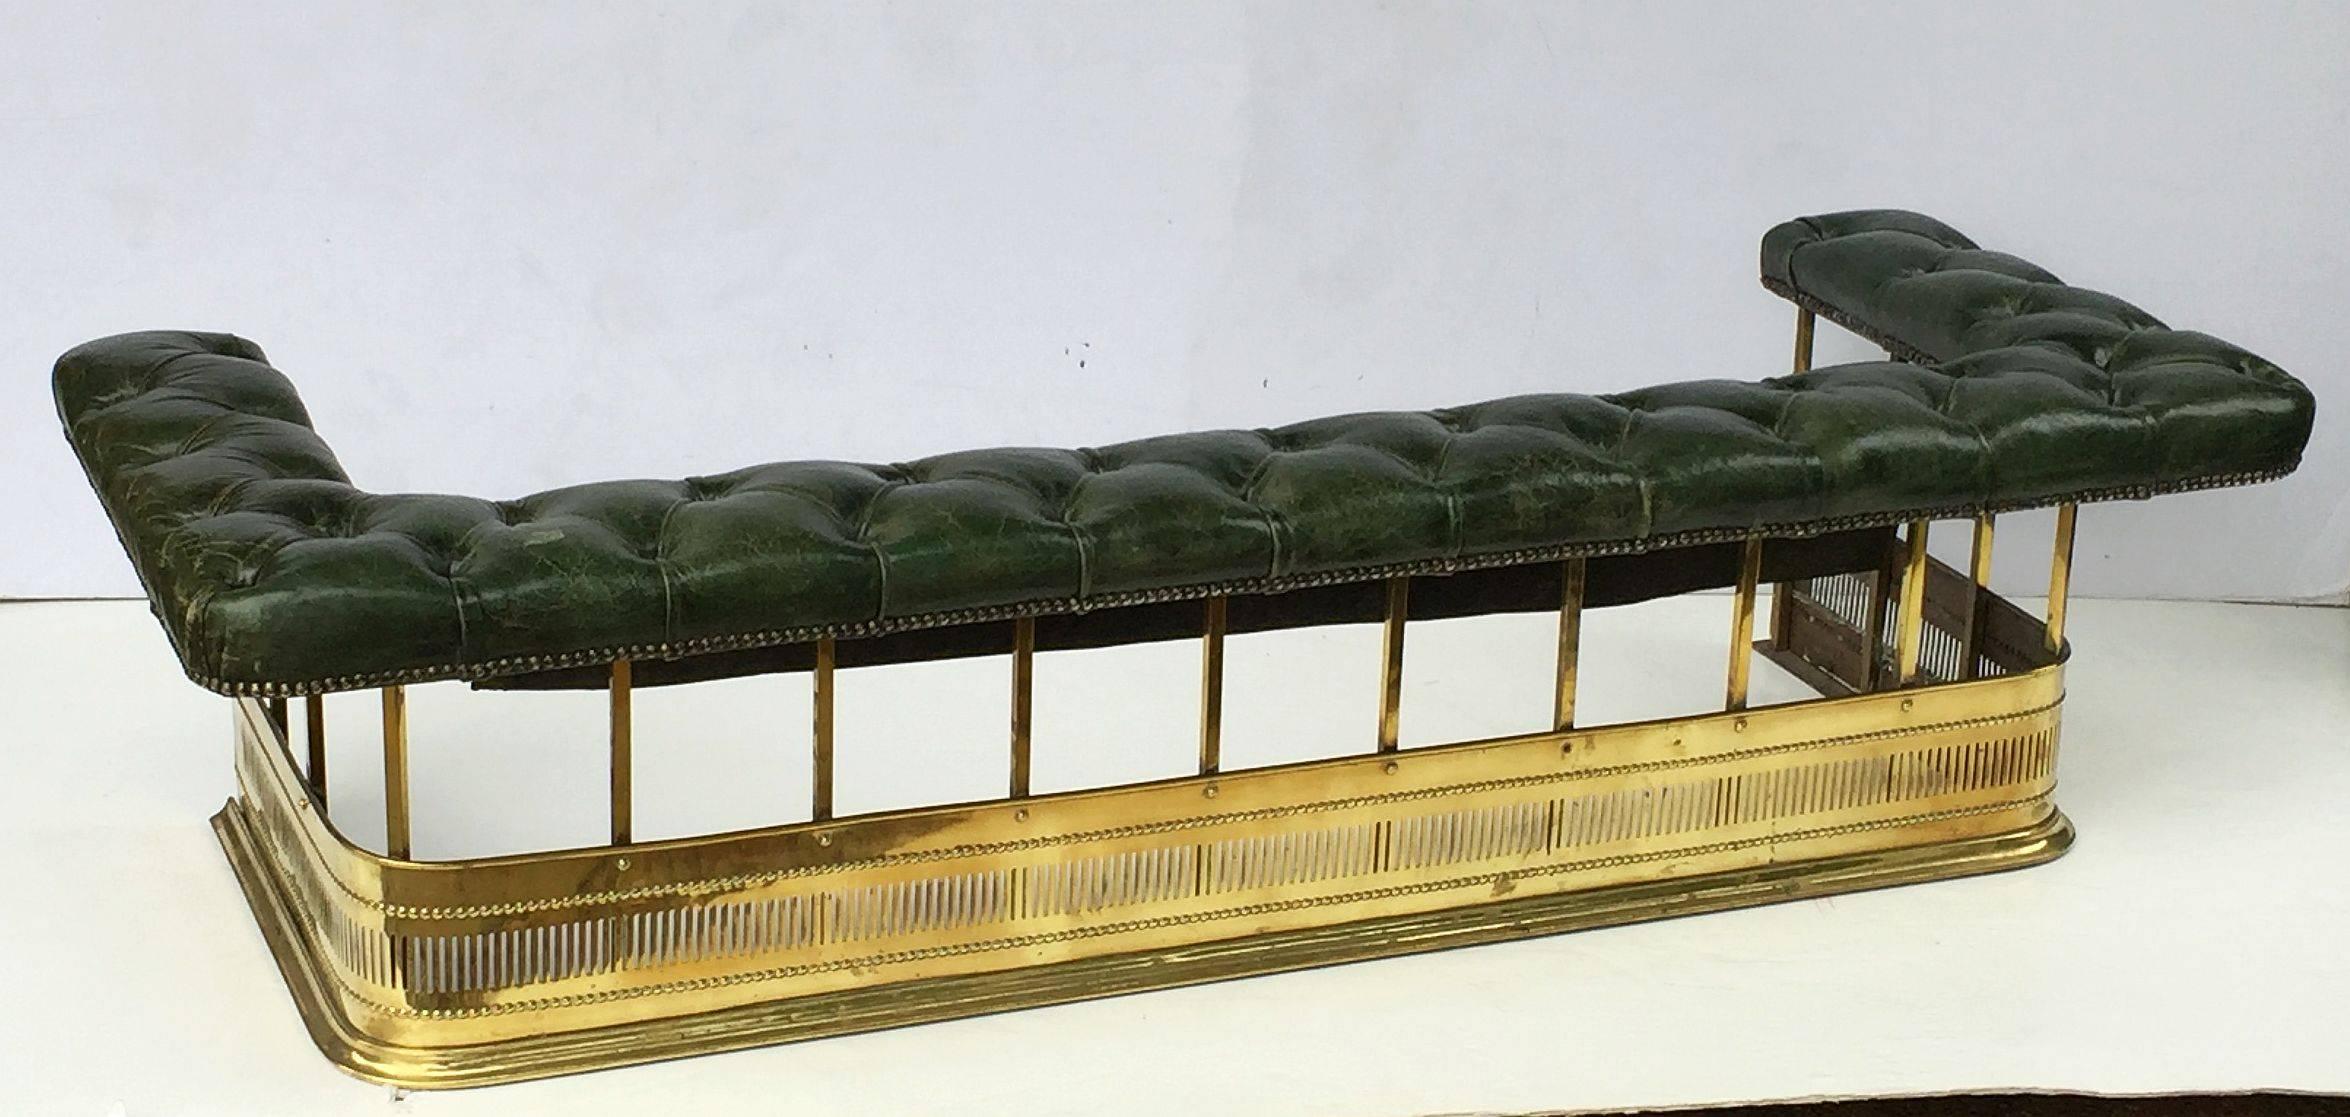 A fine English fireplace club fender or fireplace surround from the Edwardian era, featuring a tufted leather upholstered cushion seat with brass nail-head beading, mounted to a pierced rolled brass base.